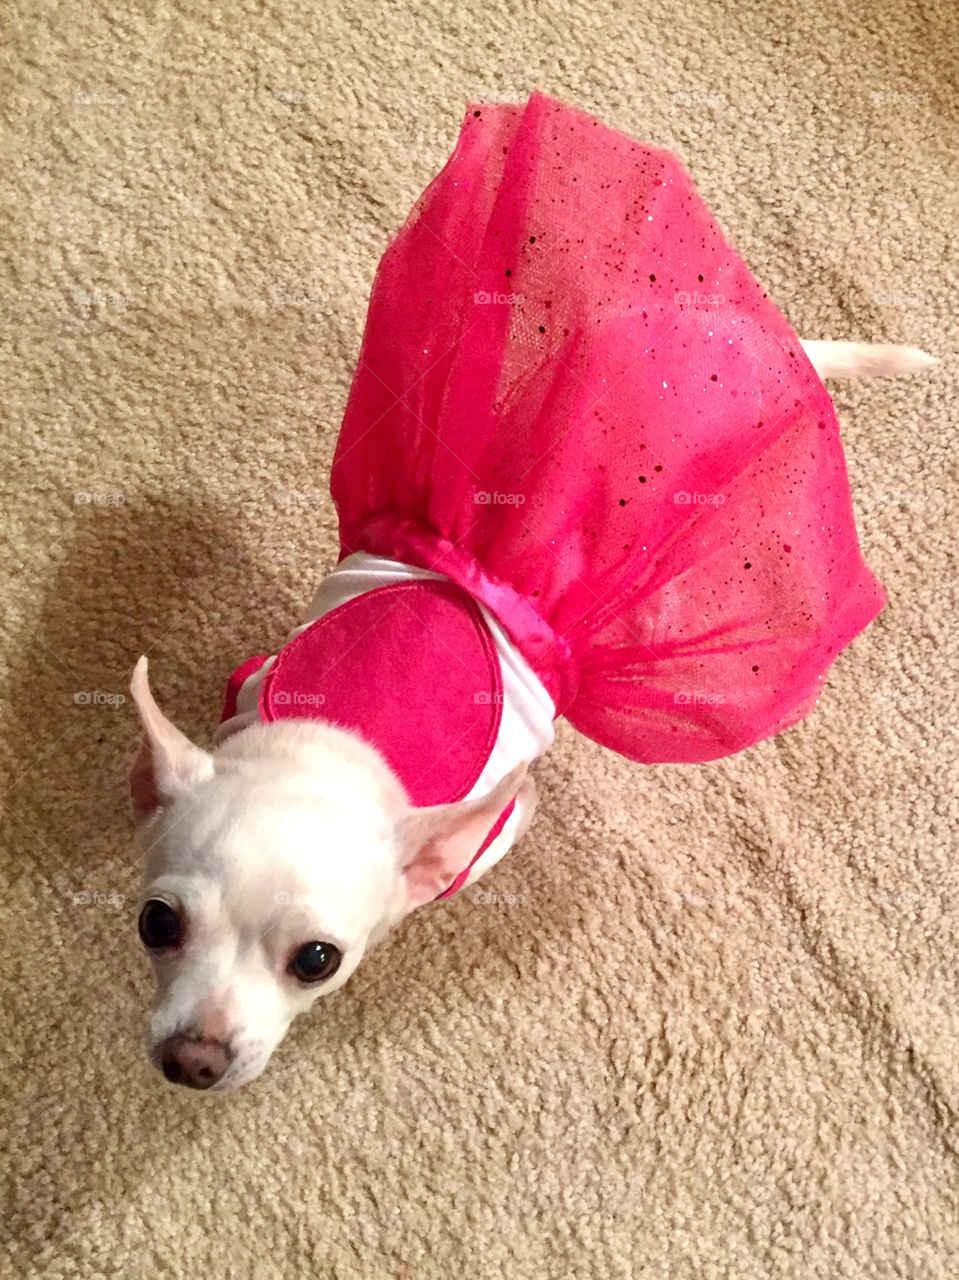 Just a fun pic of my Lola in her Valentines Day Dress.  She is a rescue who was left outside for eight years but loves playing dress up now. 